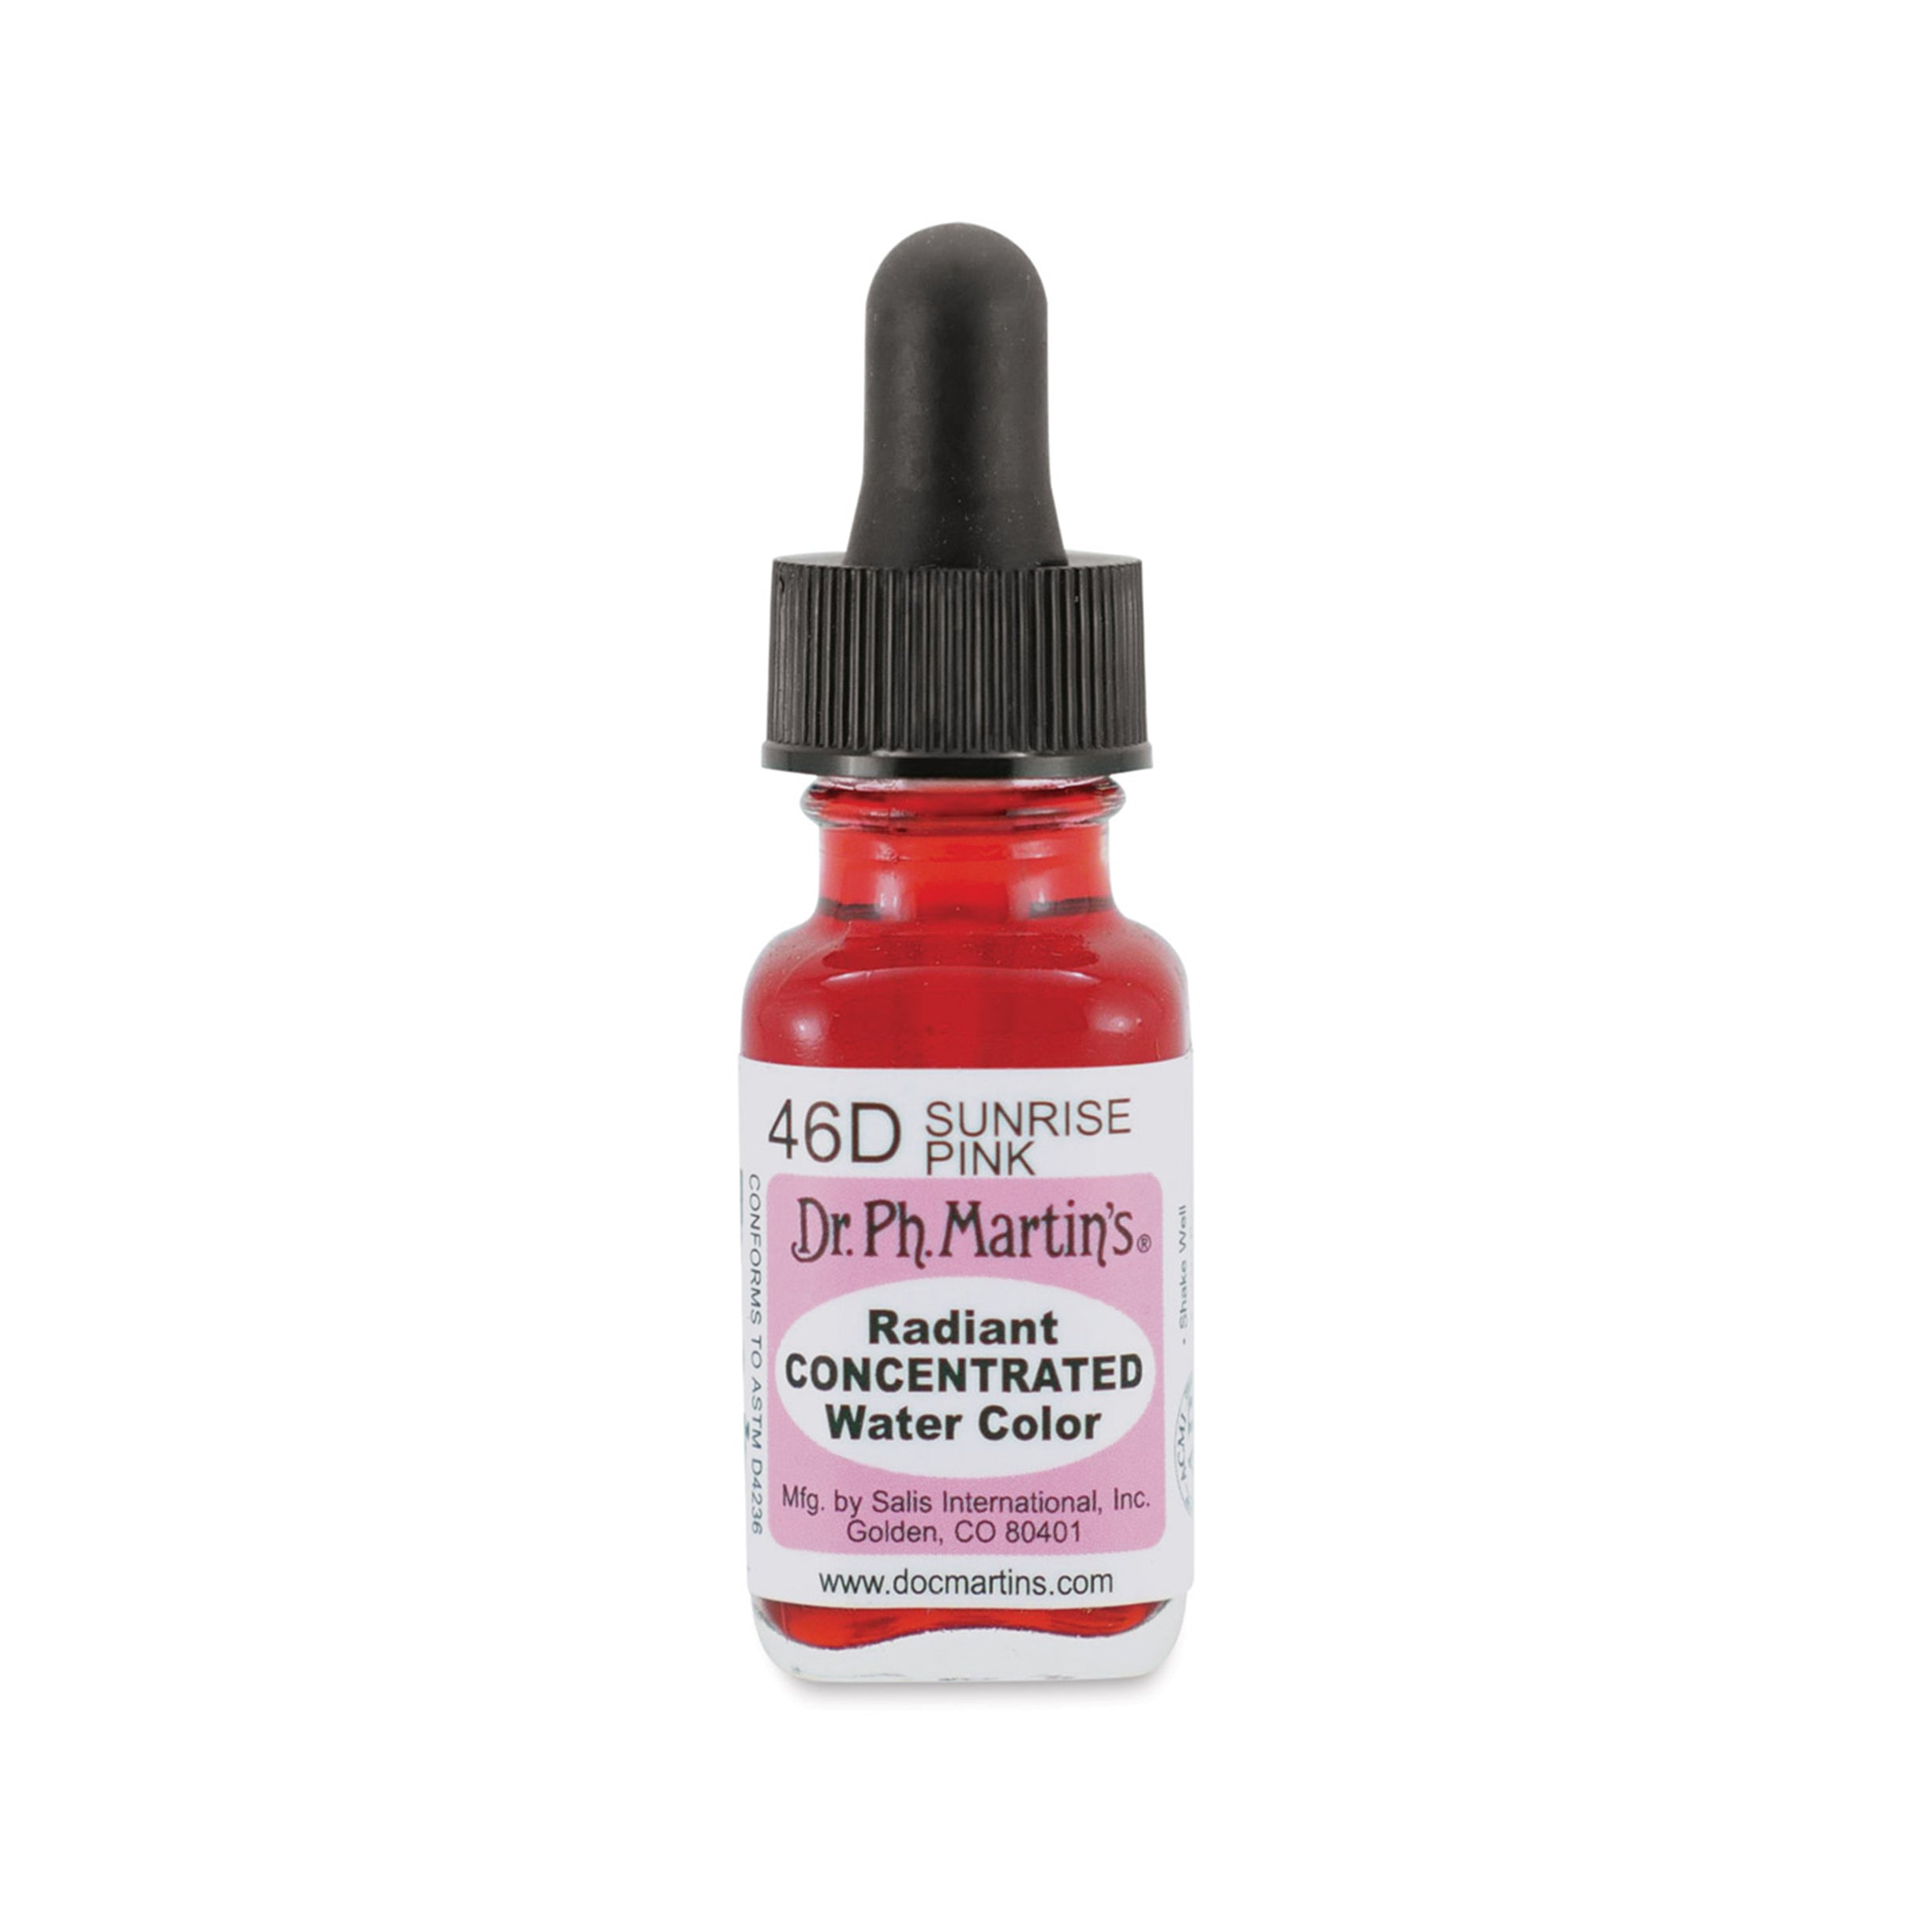 Dr. Ph. Martin’s Radiant Concentrated Watercolor